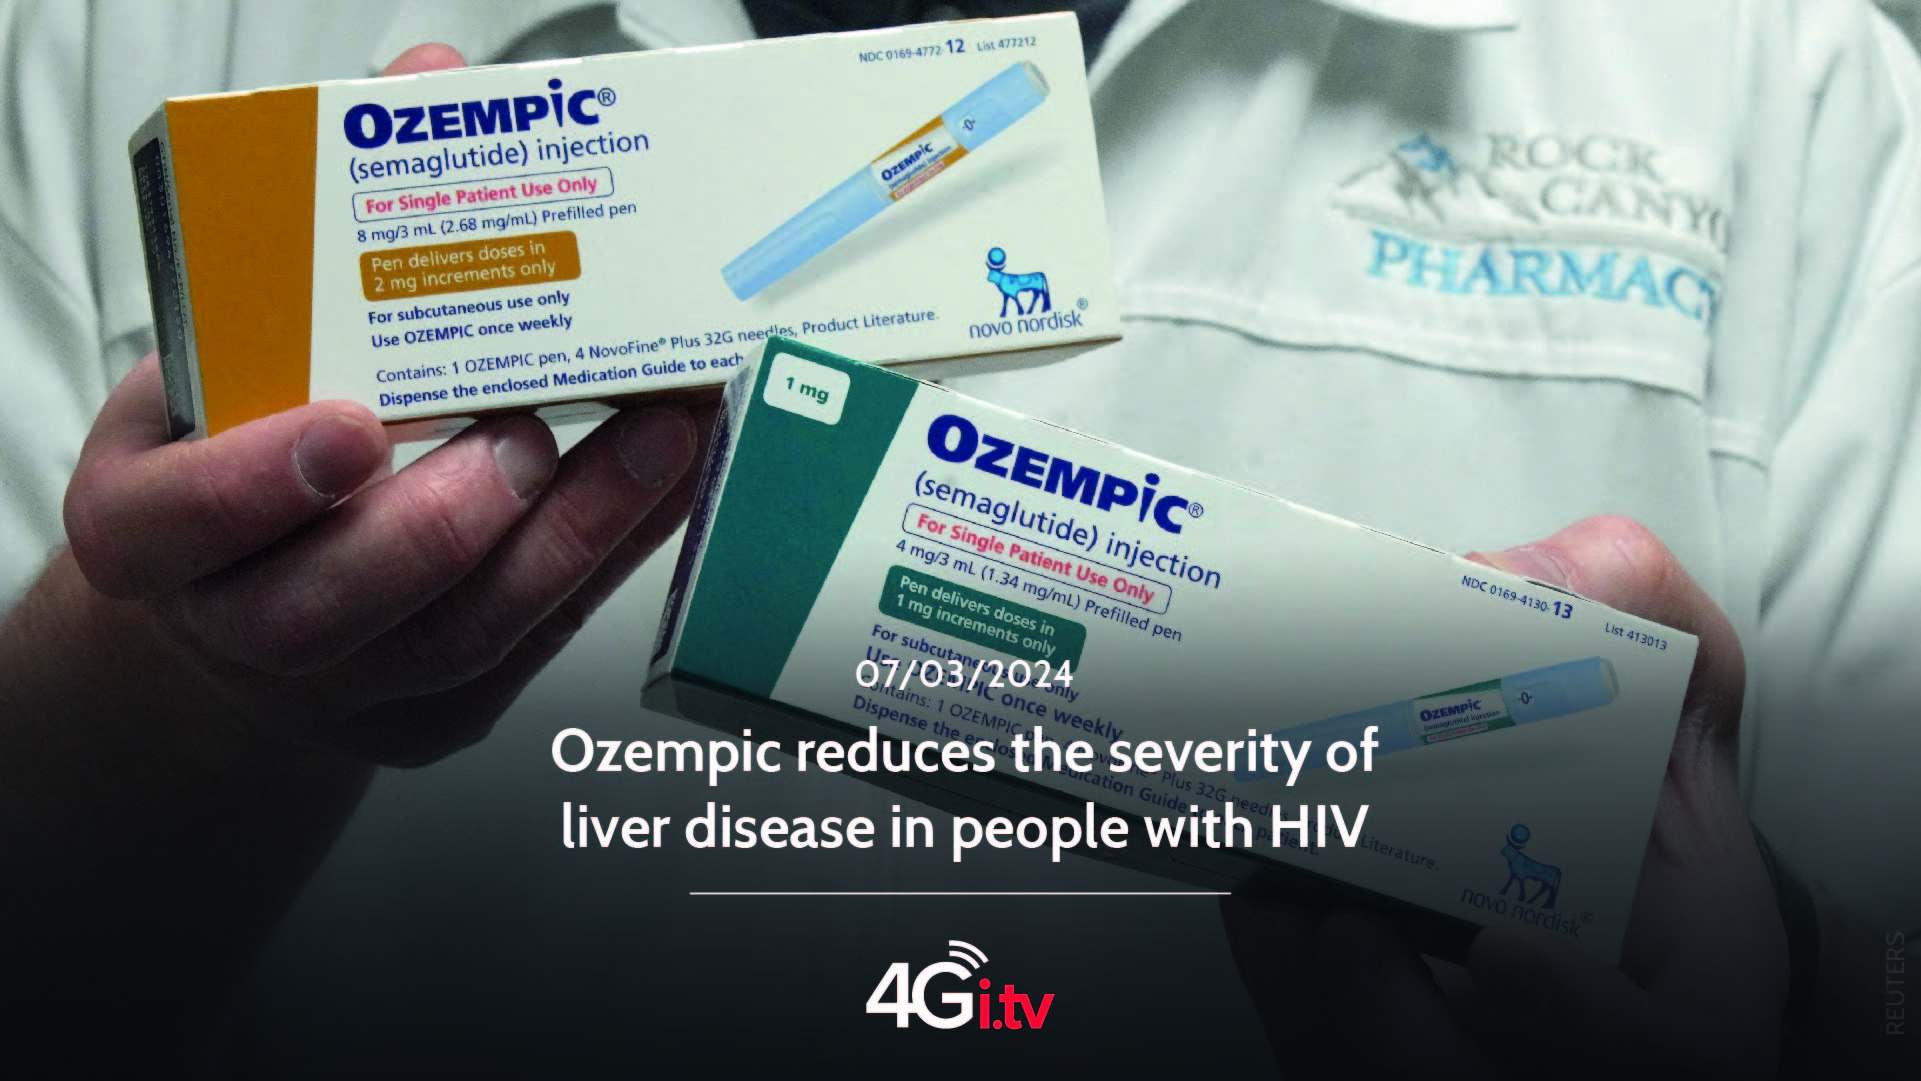 Lesen Sie mehr über den Artikel Ozempic reduces the severity of liver disease in people with HIV